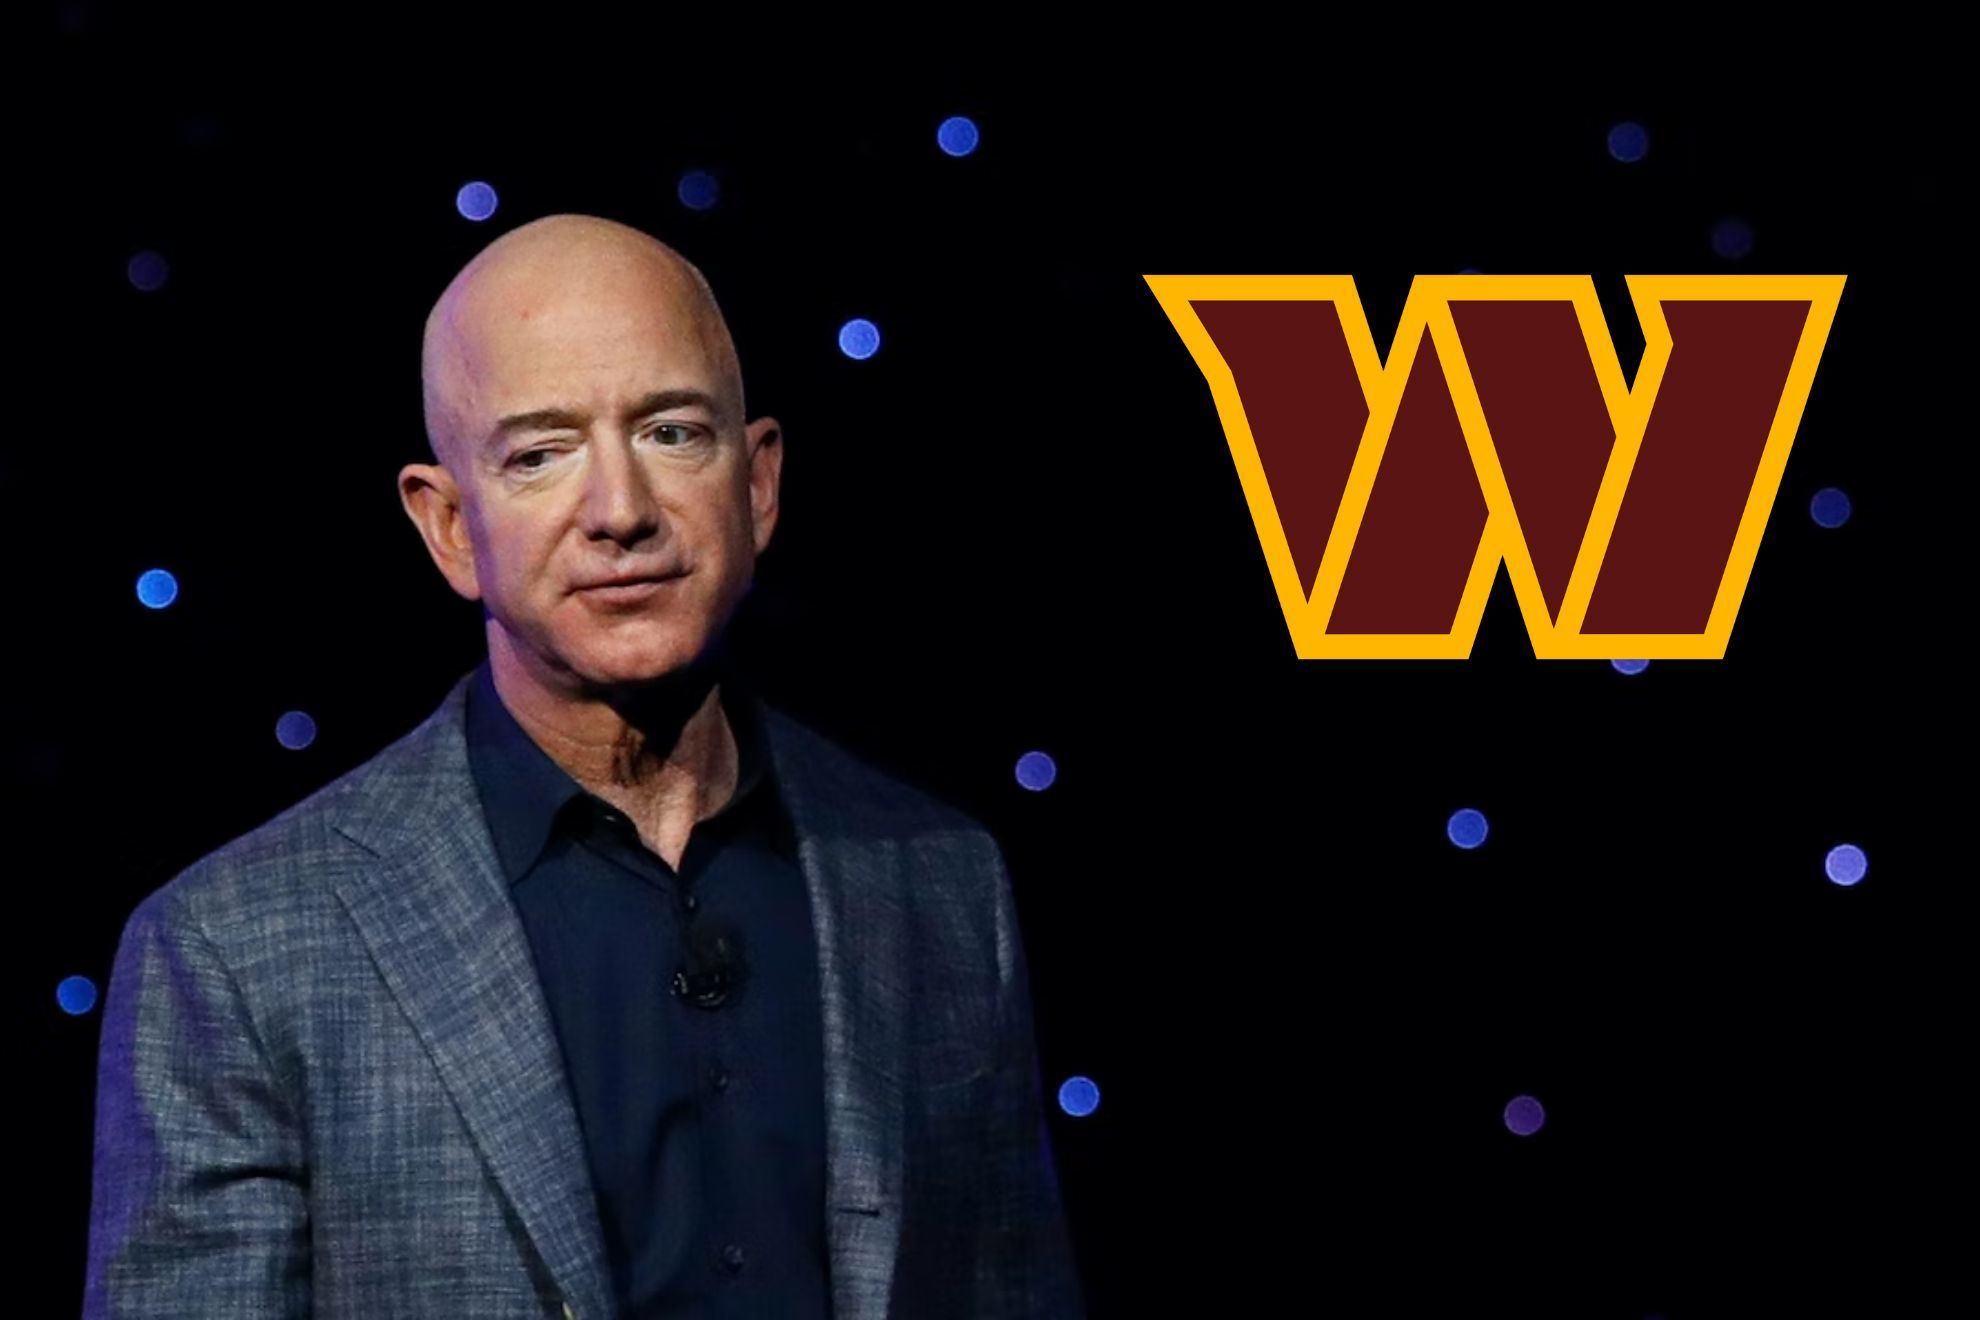 Jeff Bezos has taken an initial step in attempting to buy the NFL's Washington Commanders.